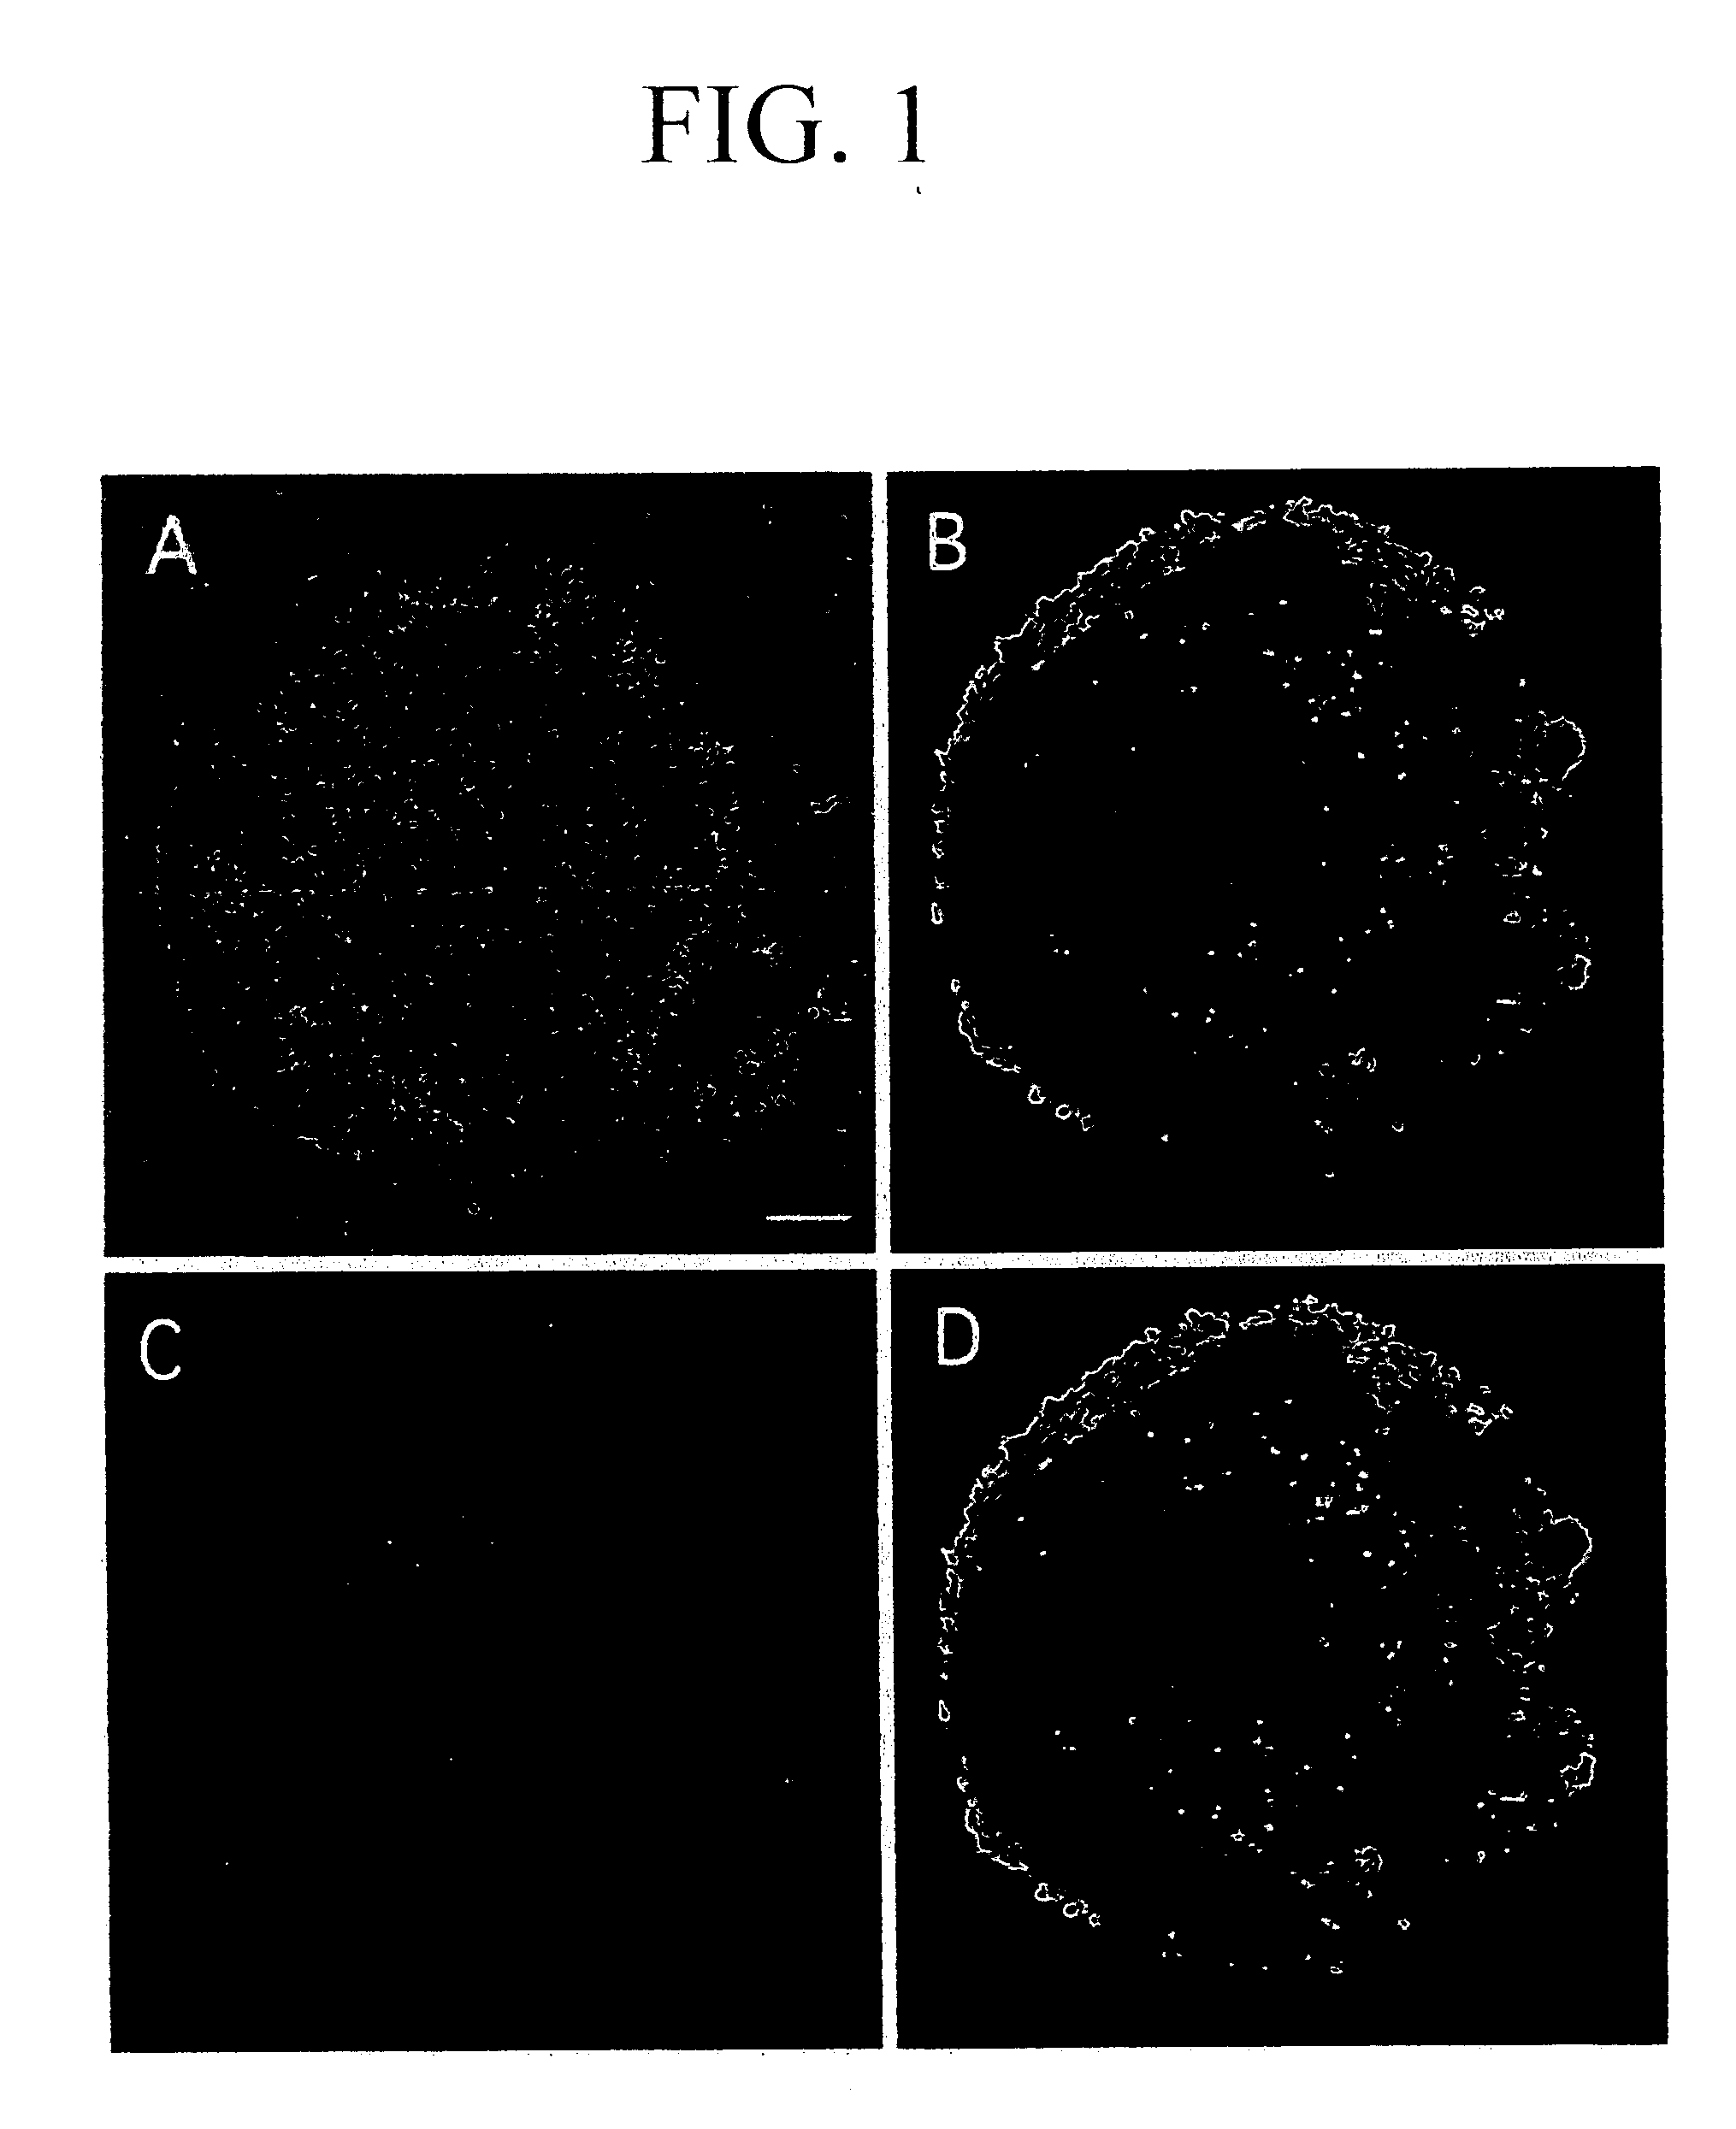 Process for producing nerve cells